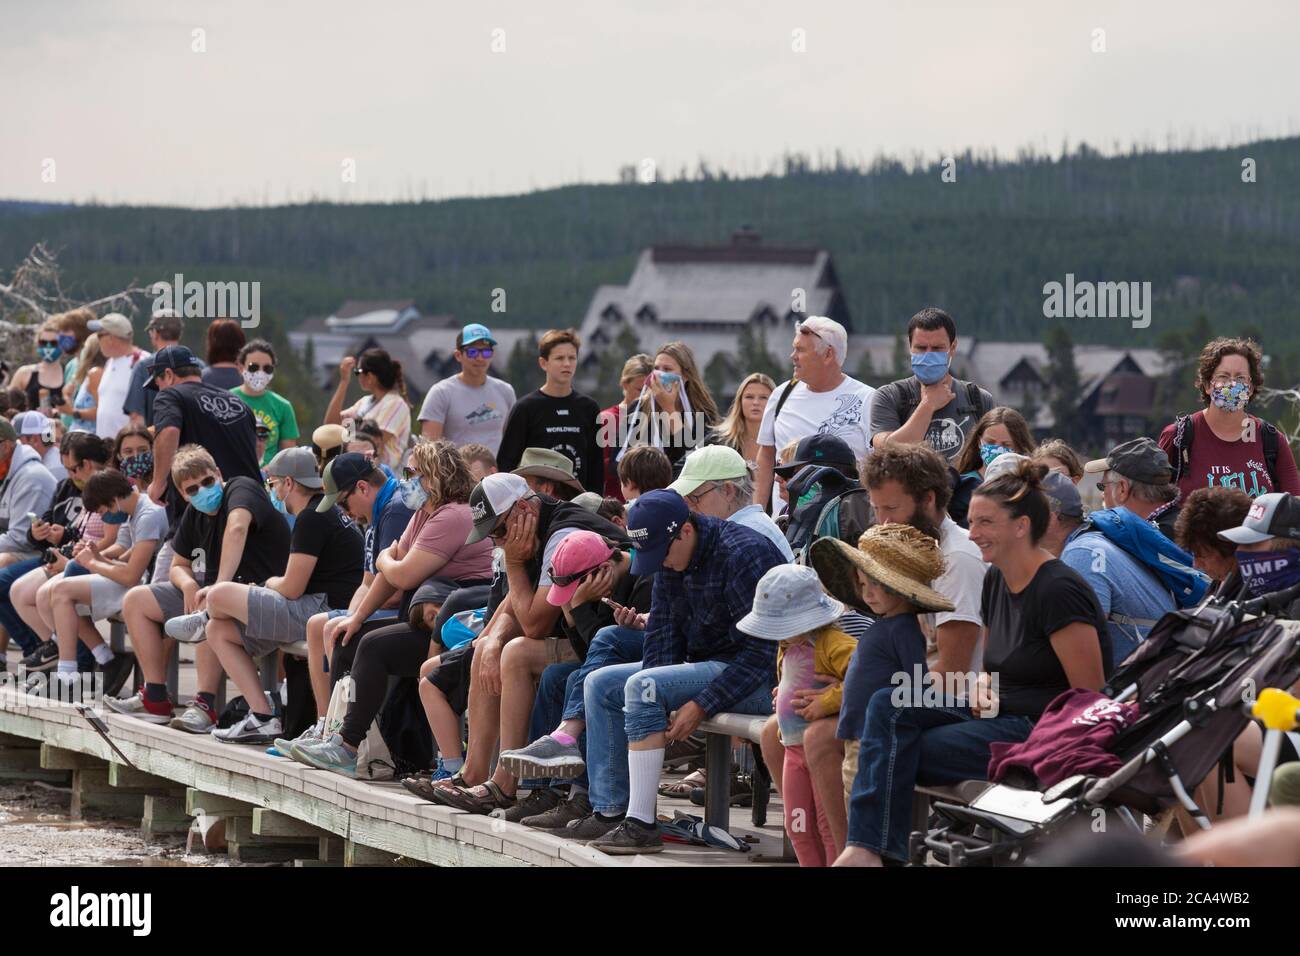 Visitors crowd the boardwalk while waiting for Grand Geyser to erupt on Monday, August 3, 2020. The park recently reported several positive cases of the COVID-19 virus among visitors and concessioners. Stock Photo